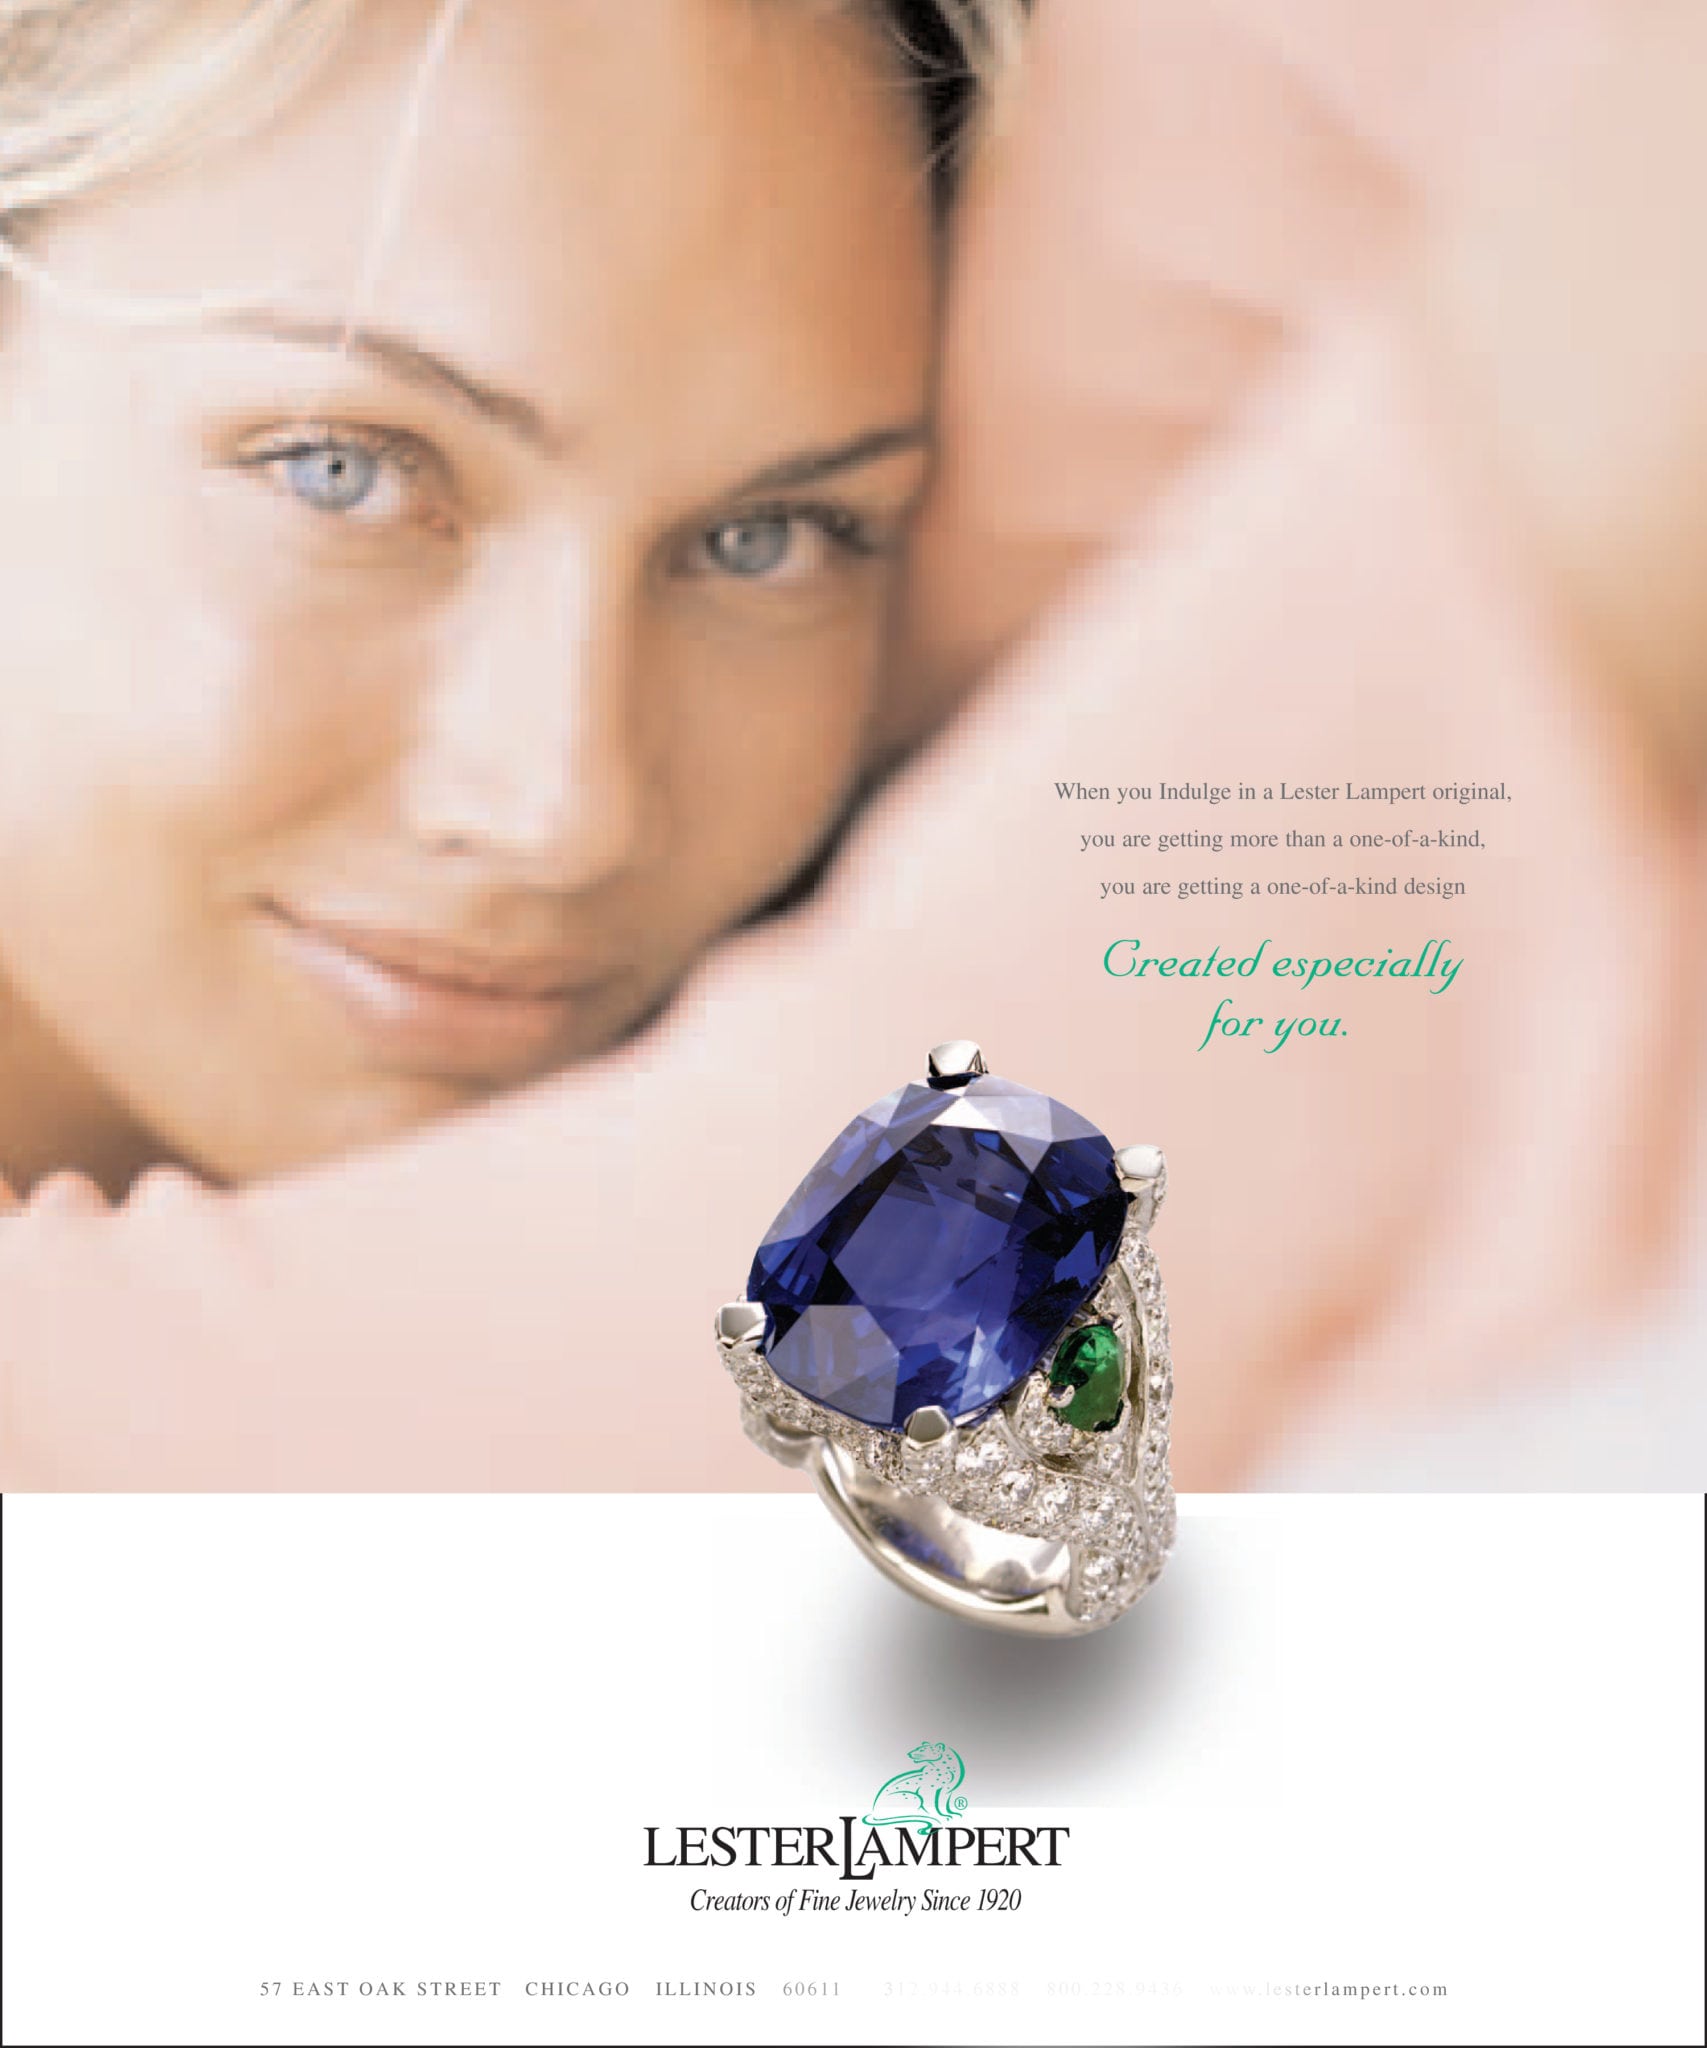 Ad Page for Lester Lampert Jewelers featuring a large Sapphire Ring with diamonds and emeralds sitting on a female model shot Product Photography